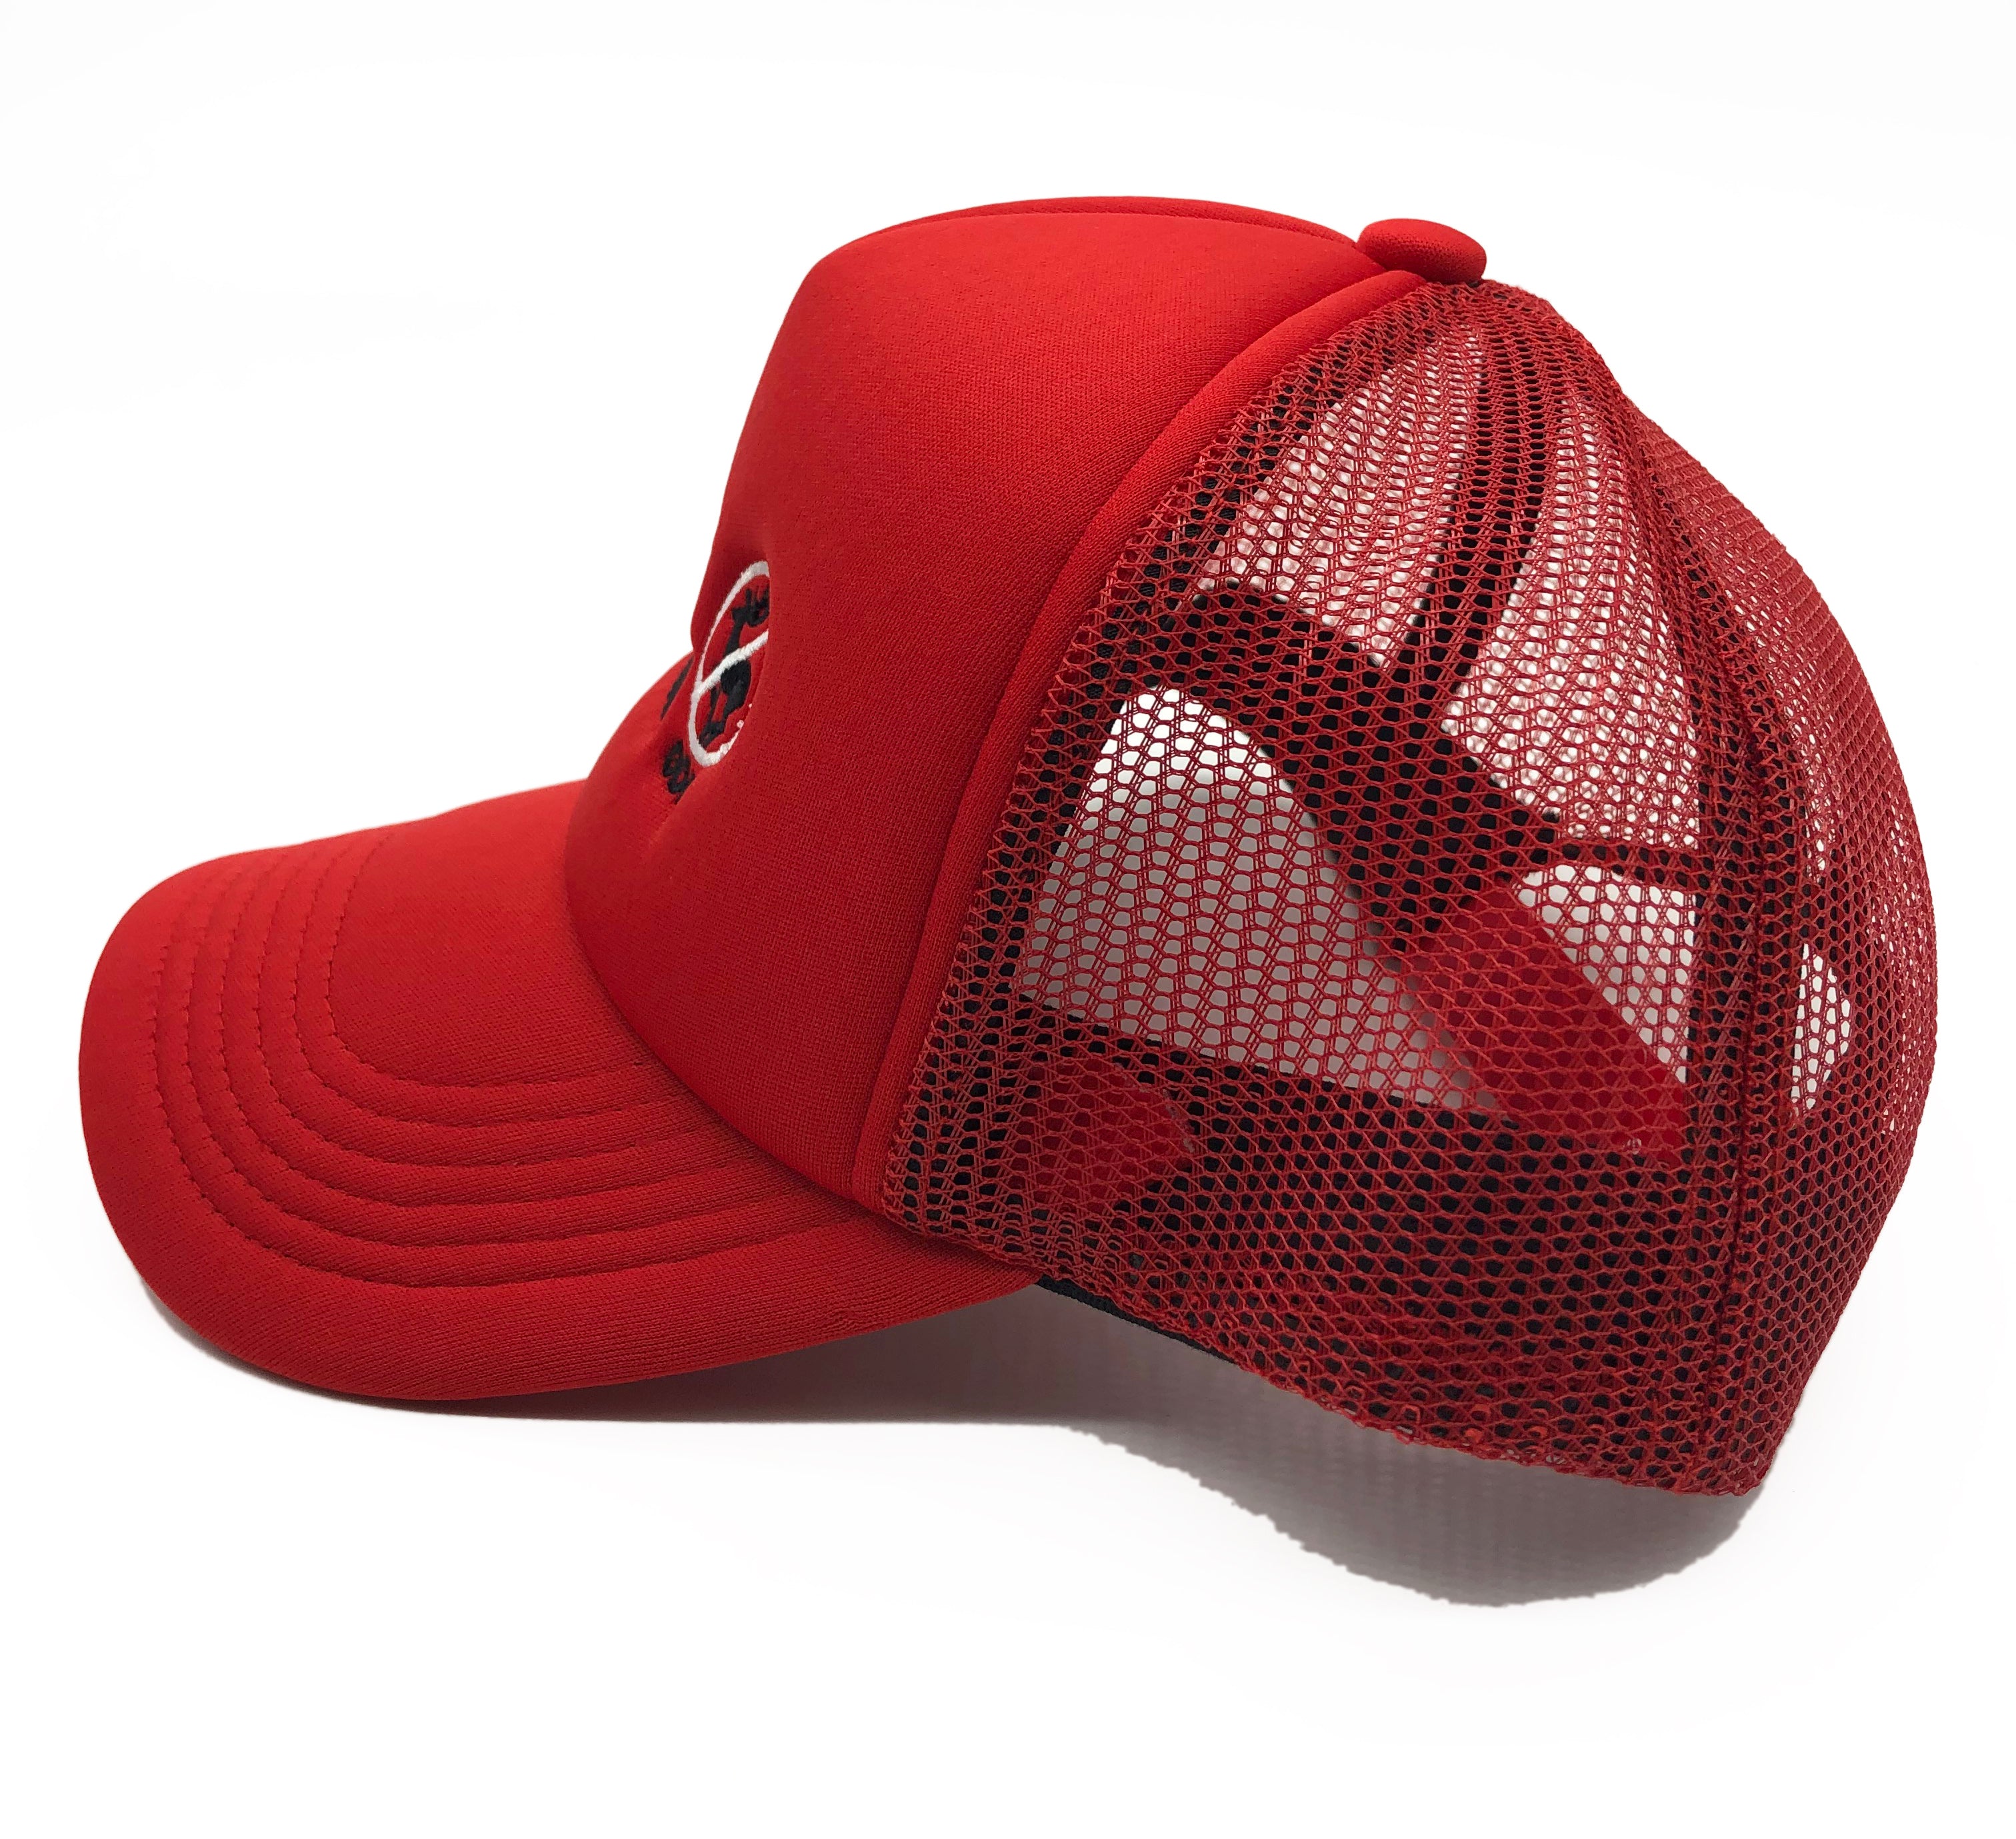 The South Carolina Area Code Trucker Hat- Red